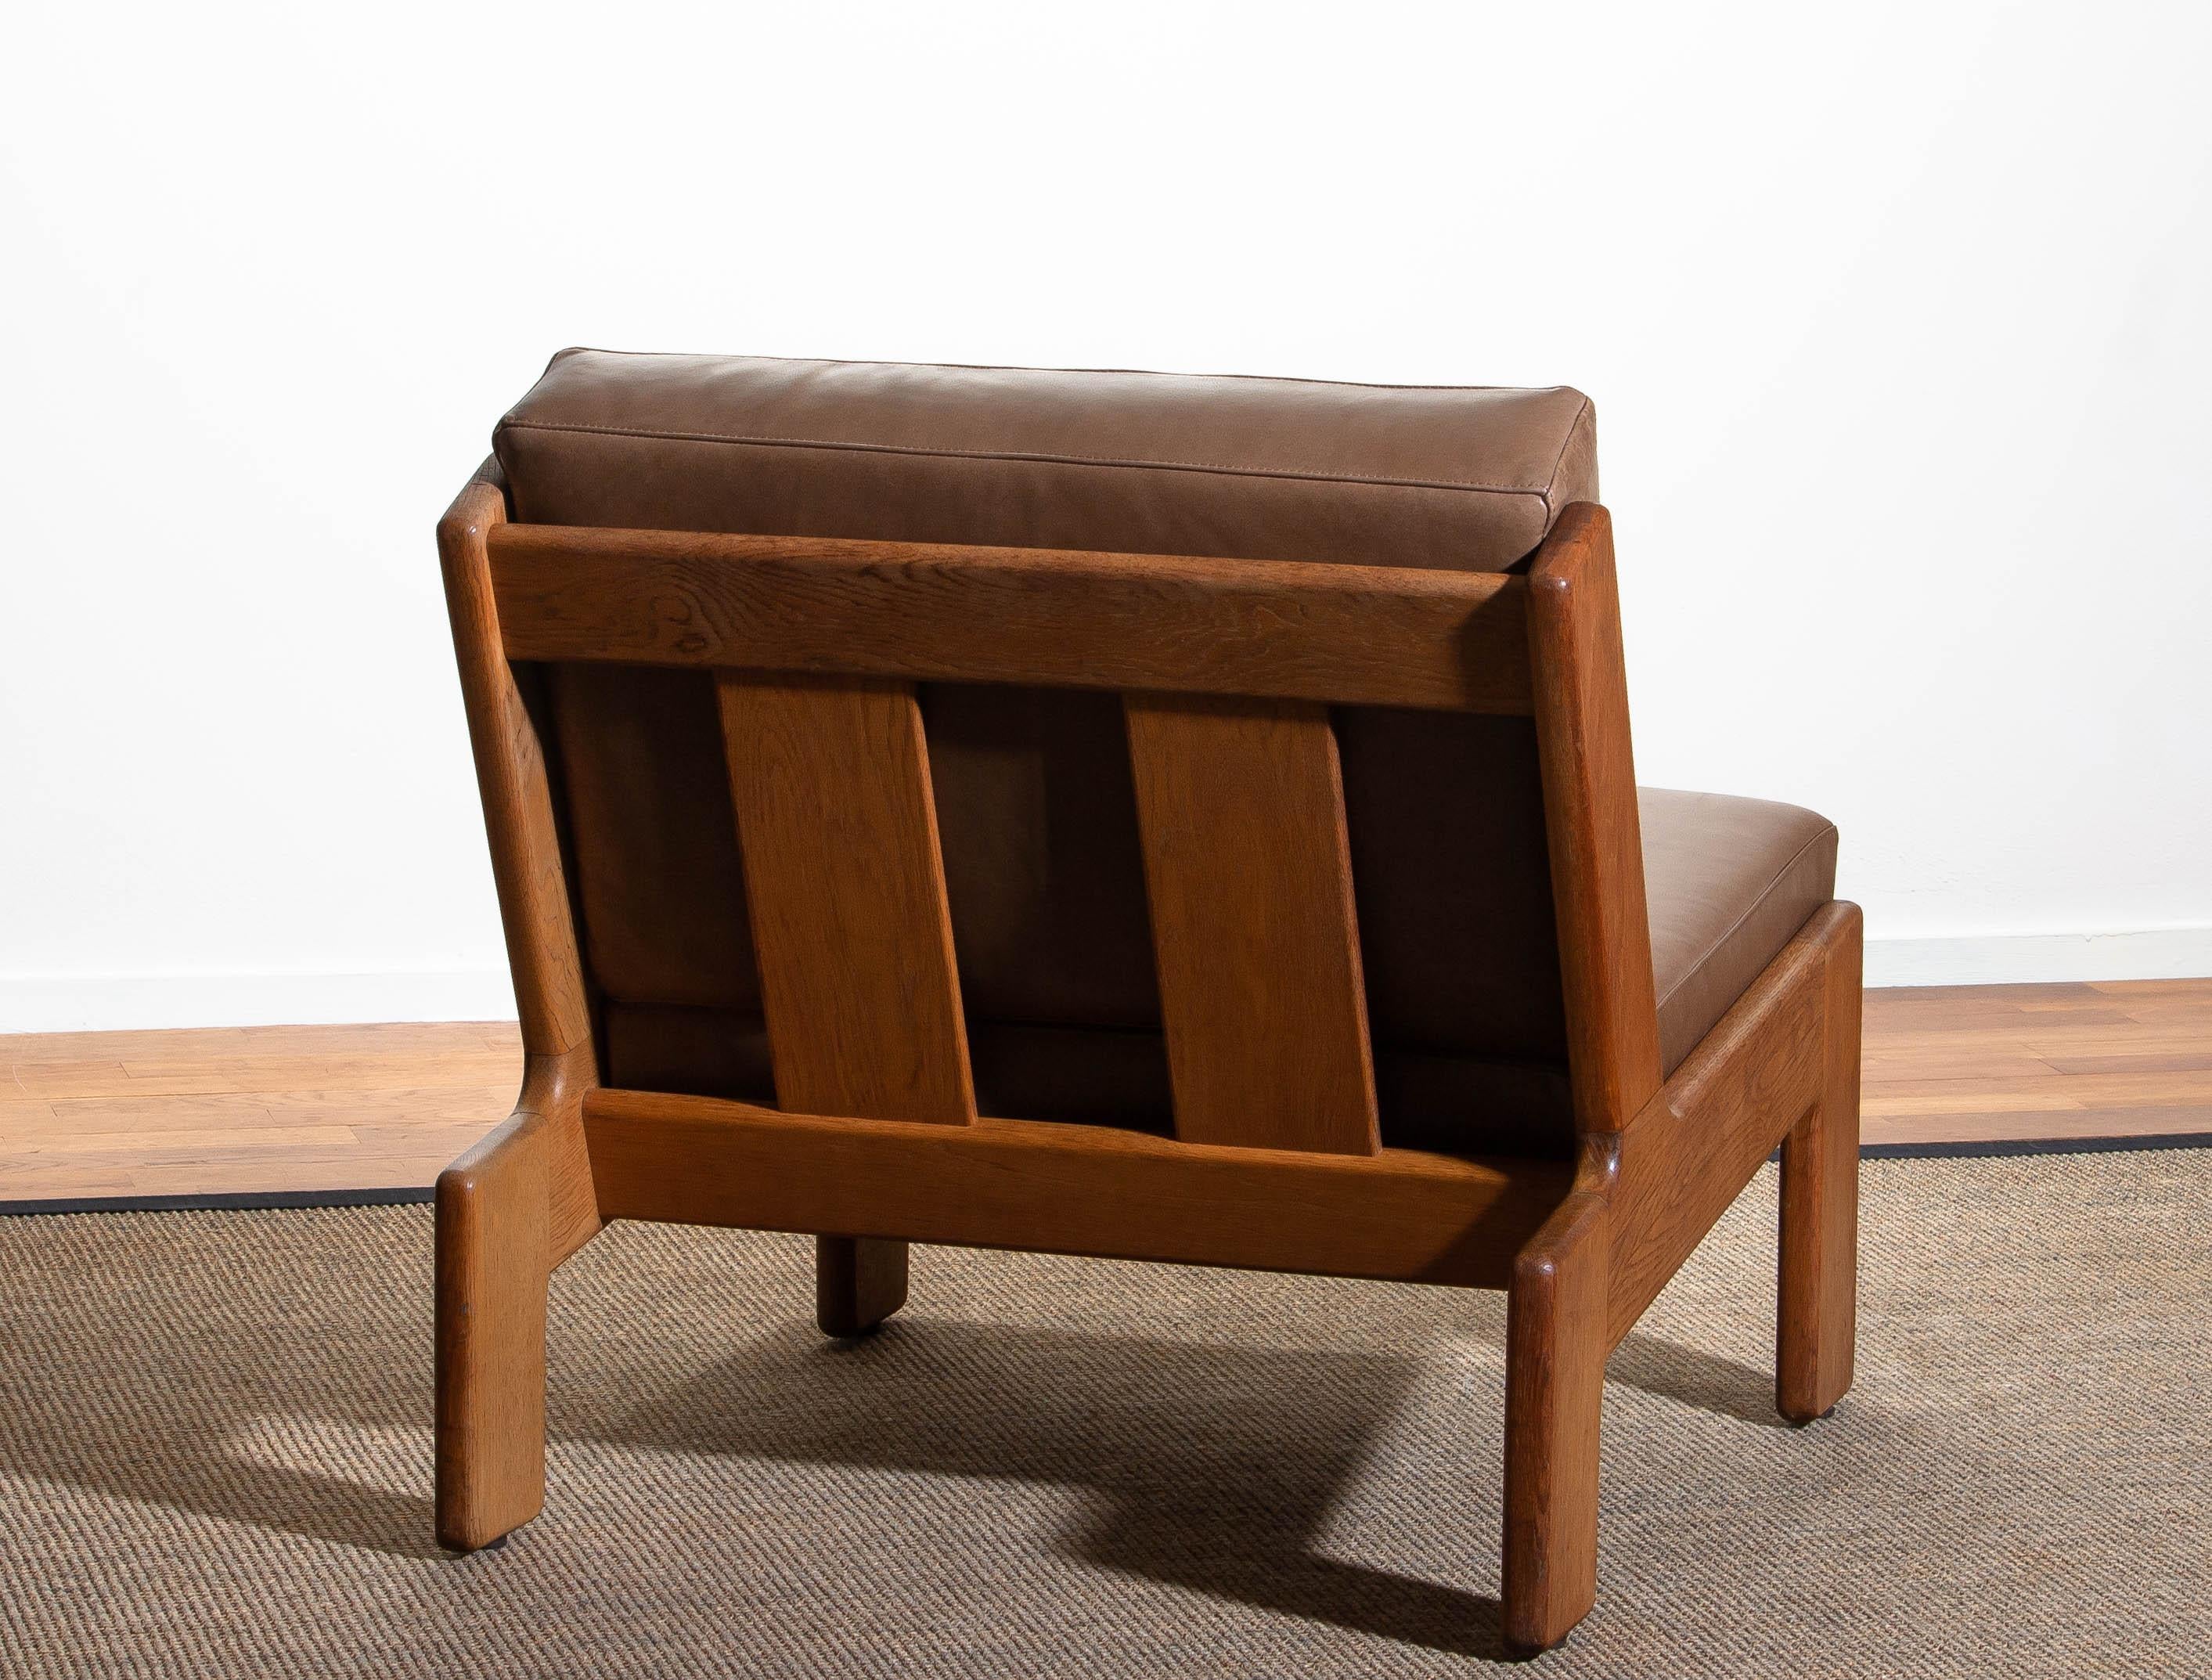 1960s, Oak and Leather Cubist Lounge Chair by Esko Pajamies for Asko, Finland 3